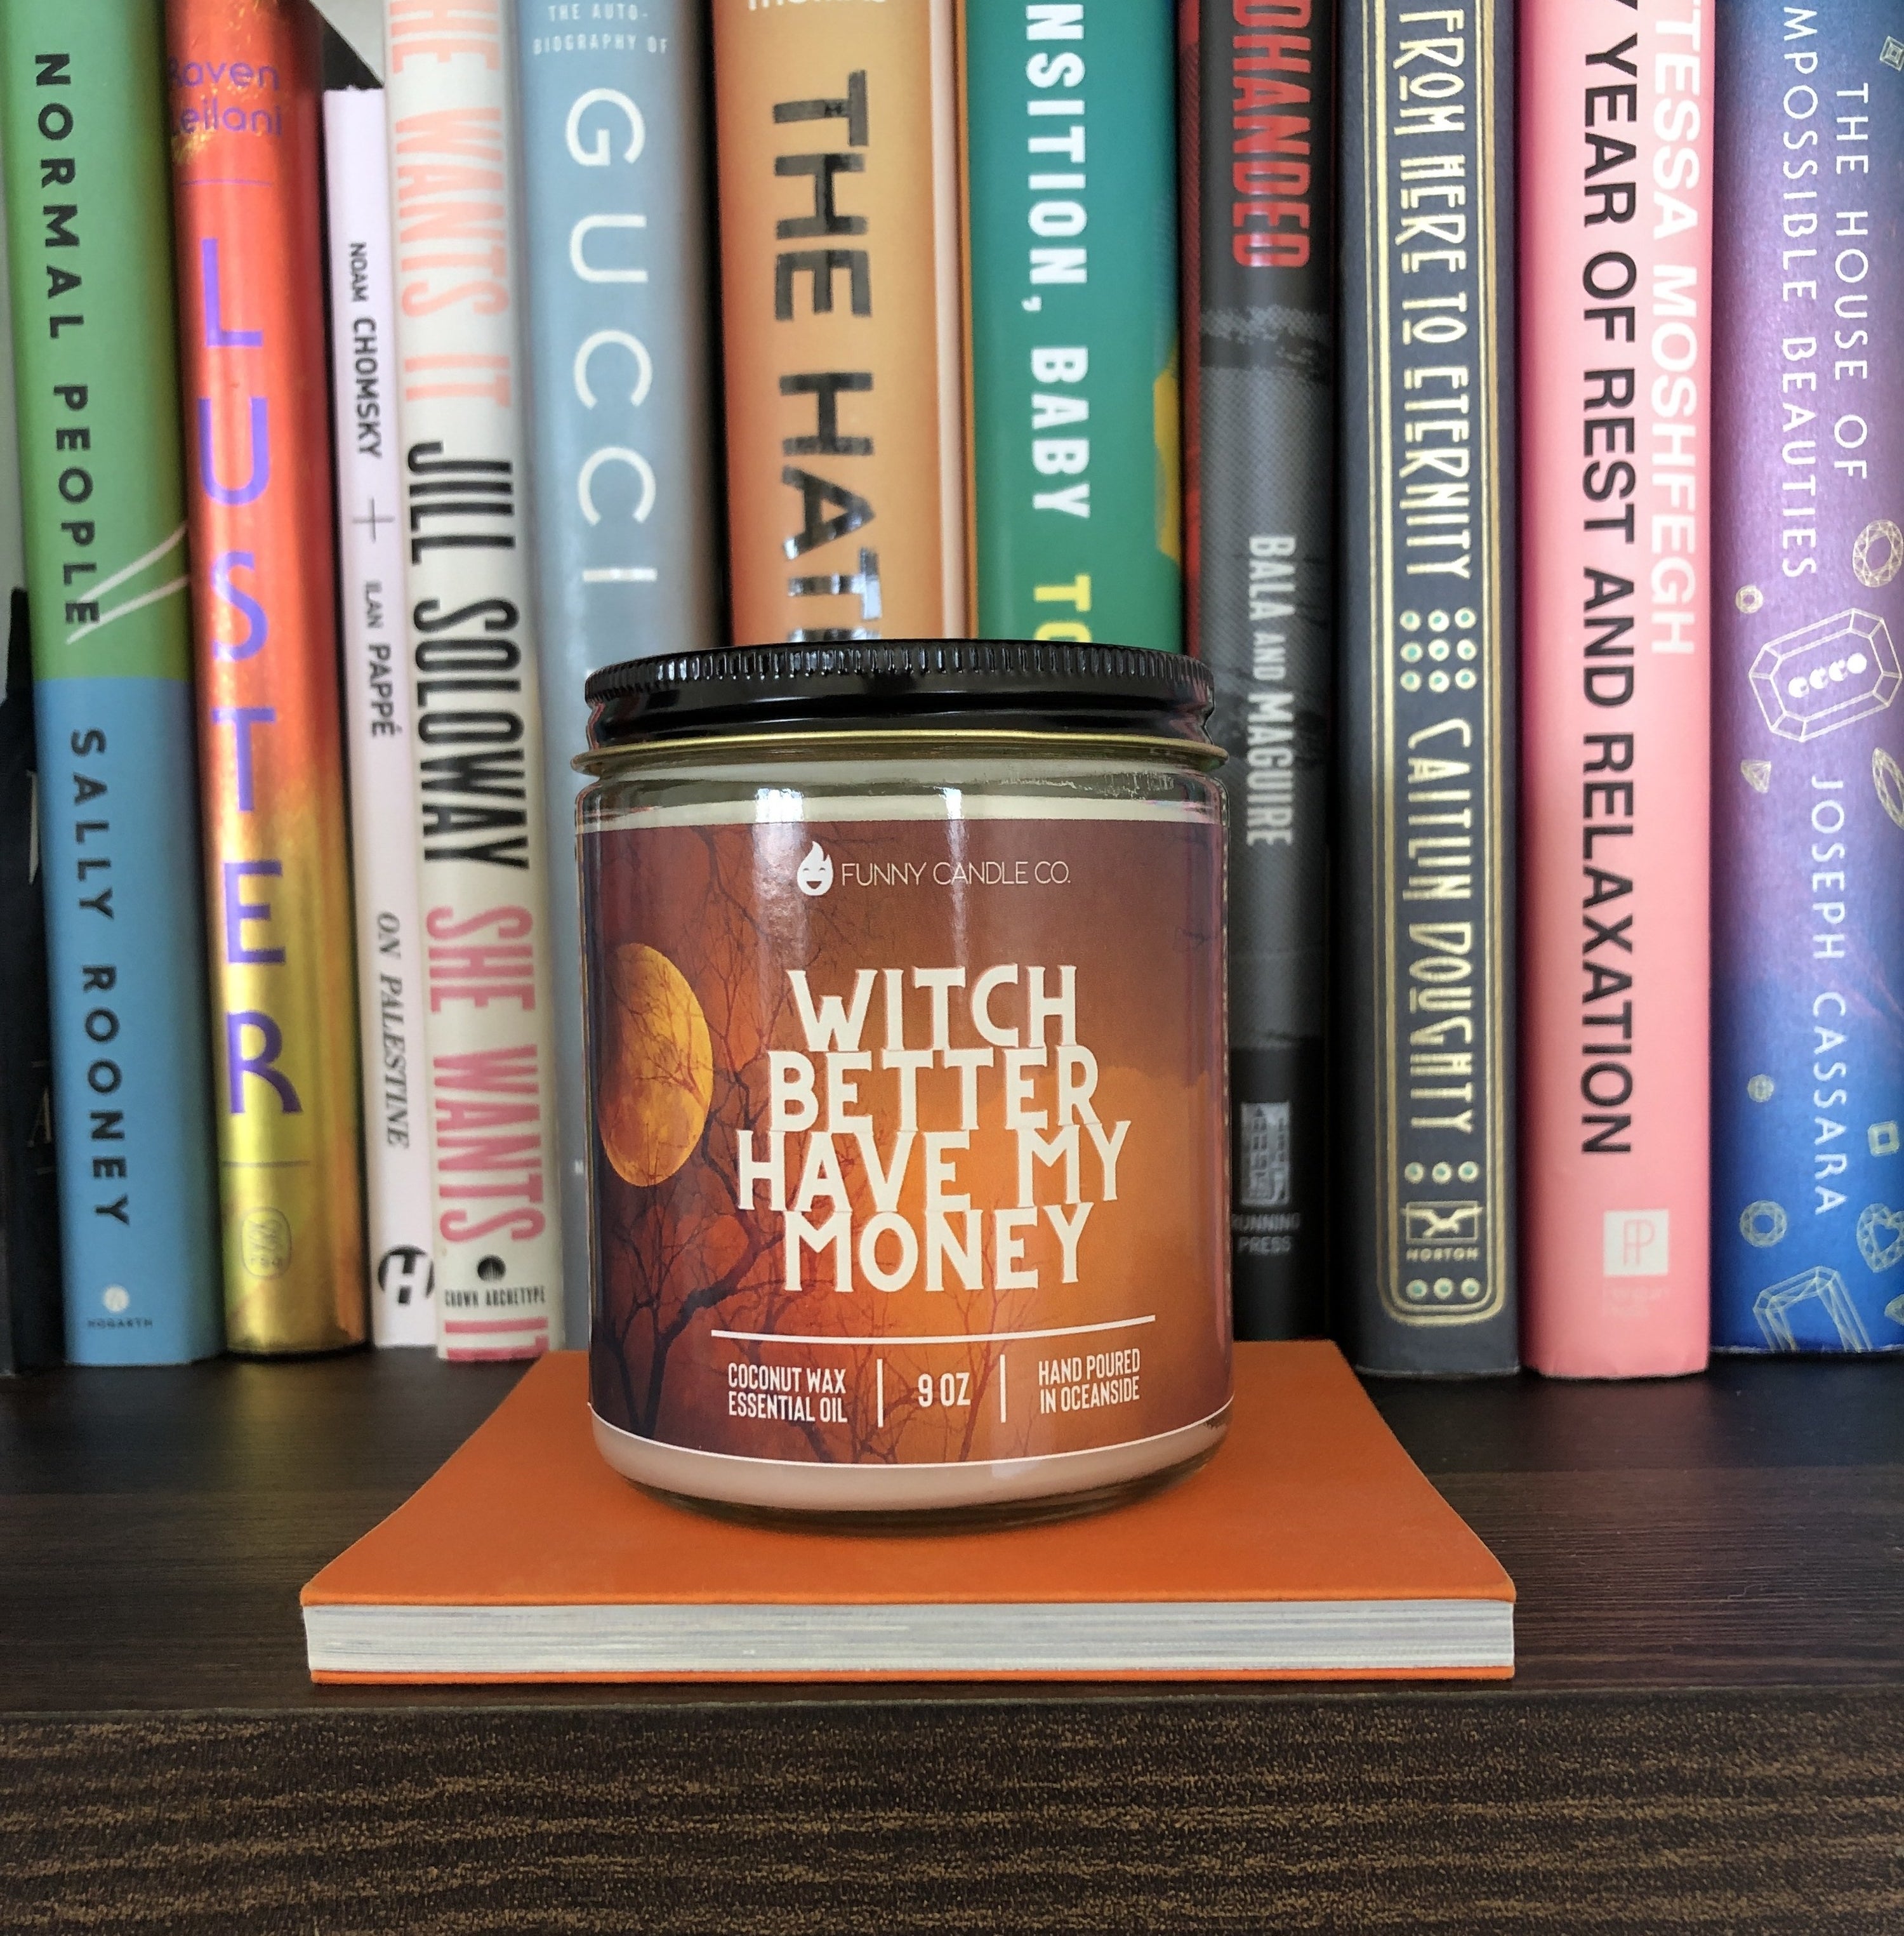 The candle reading &quot;witch better have my money&quot; is displayed on a bookshelf